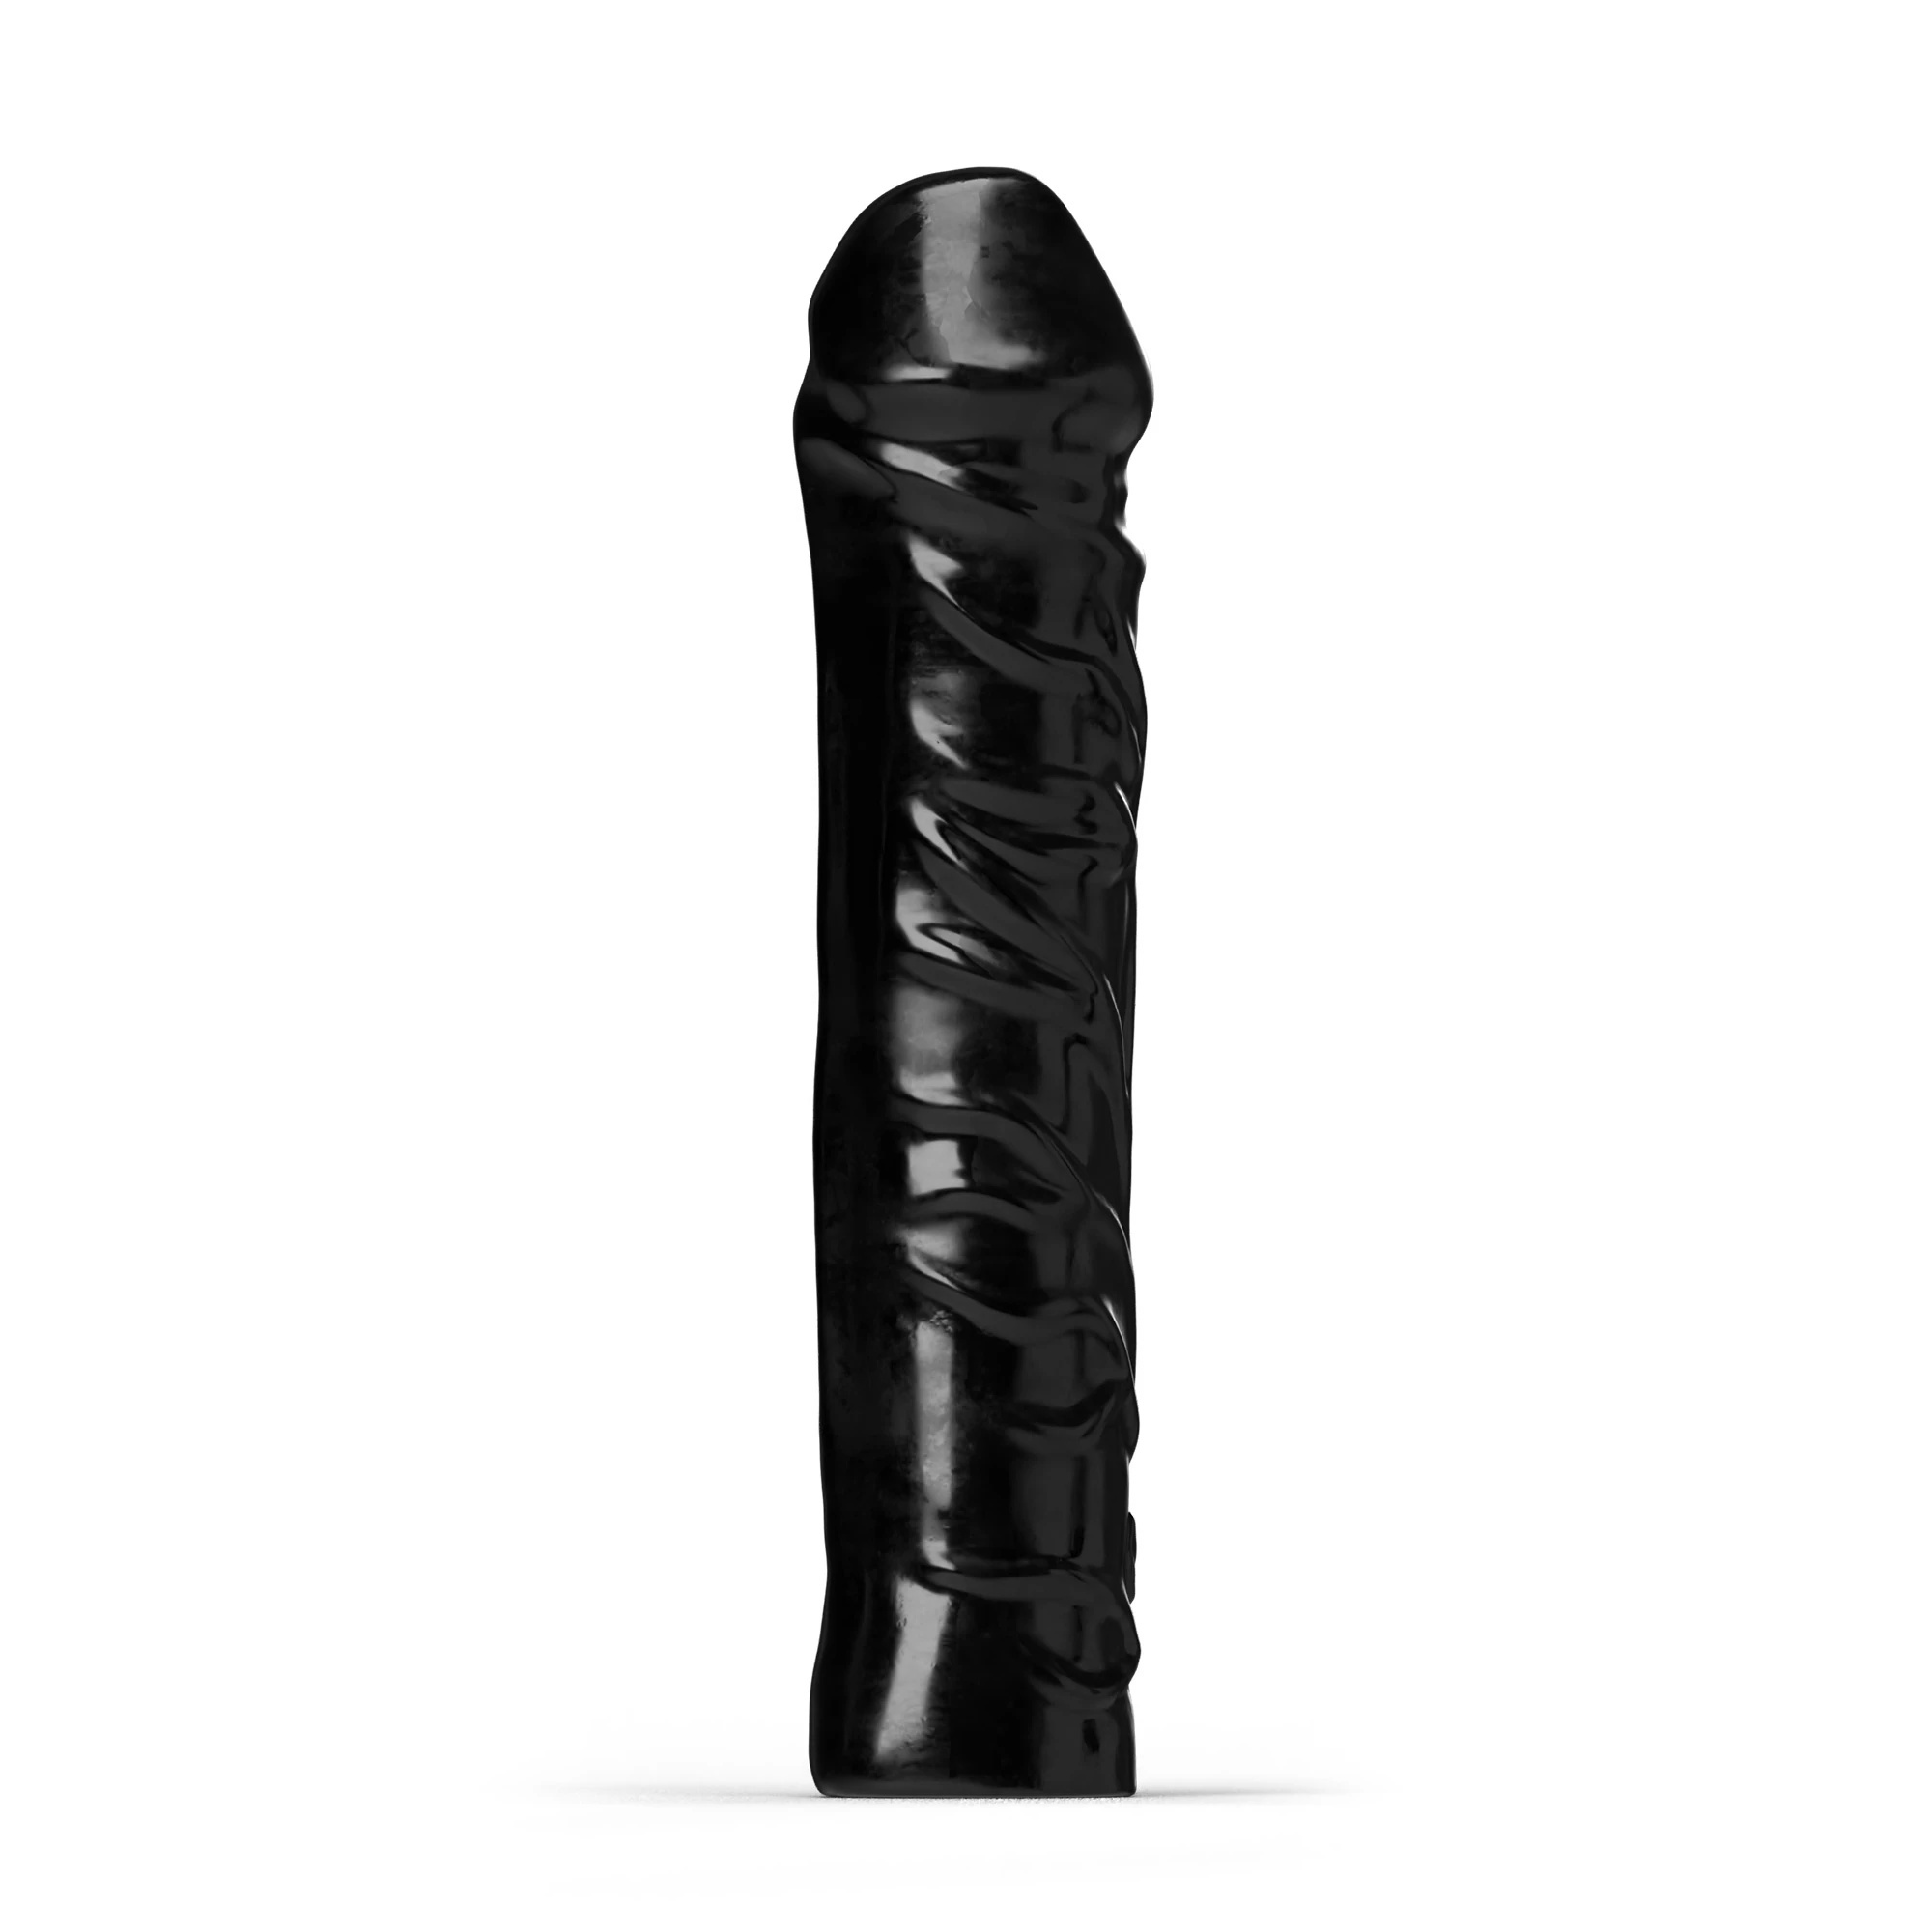 Sex Toys Wholesale Urban Burner The Best Dildos and Butt Plugs pic